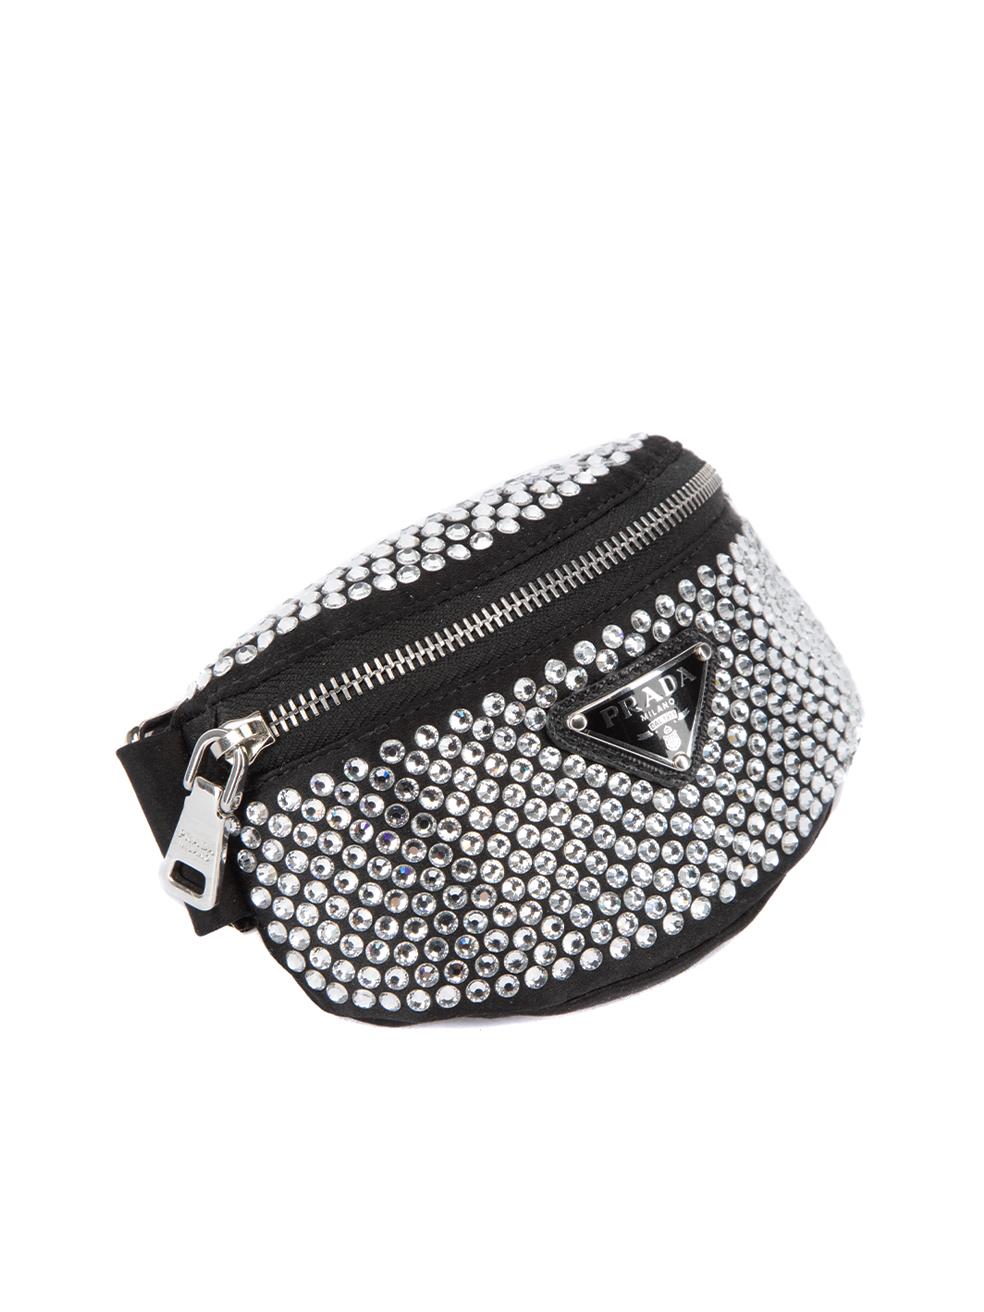 CONDITION is Never Worn. No visible wear to cuff is evident on this used Prada designer resale item.  This item comes with original box.
 
 Details
  Black
 Nylon
 Mini pouch
 Crystal embellished
 With adjustable elastic band
 Enamelled metal